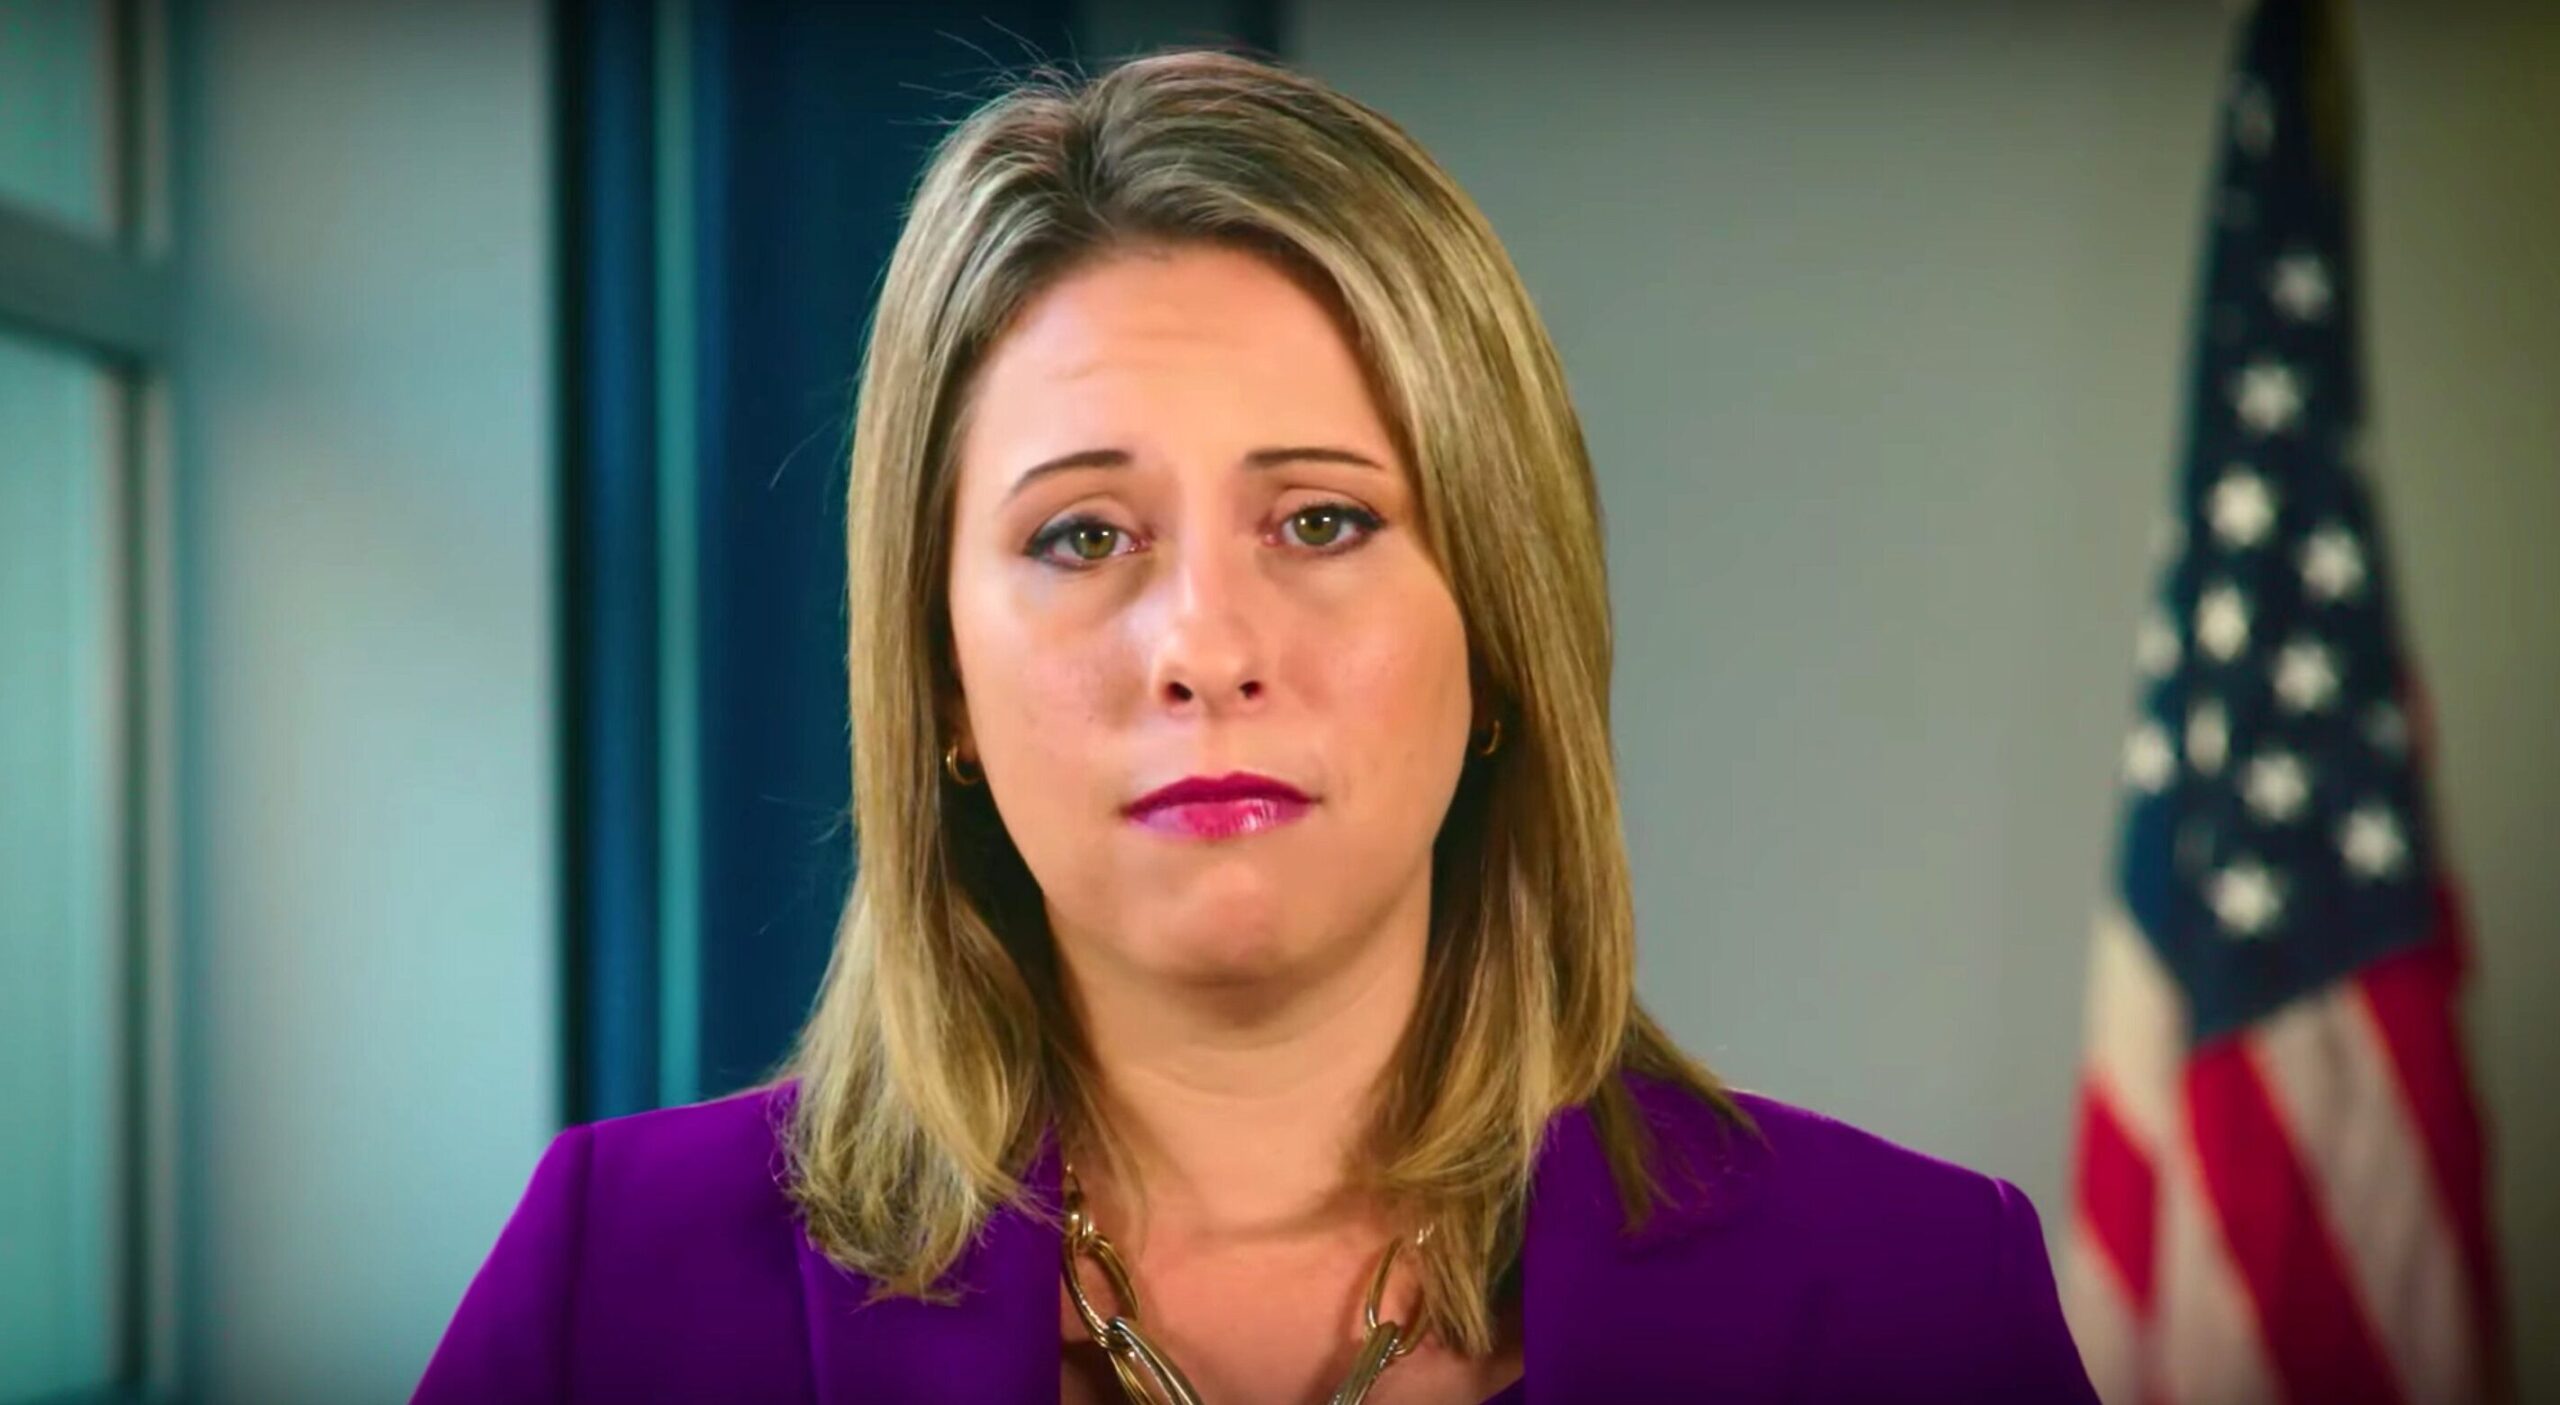 Former Throuple Rep. Katie Hill Sues Ex, Media Over Nude 